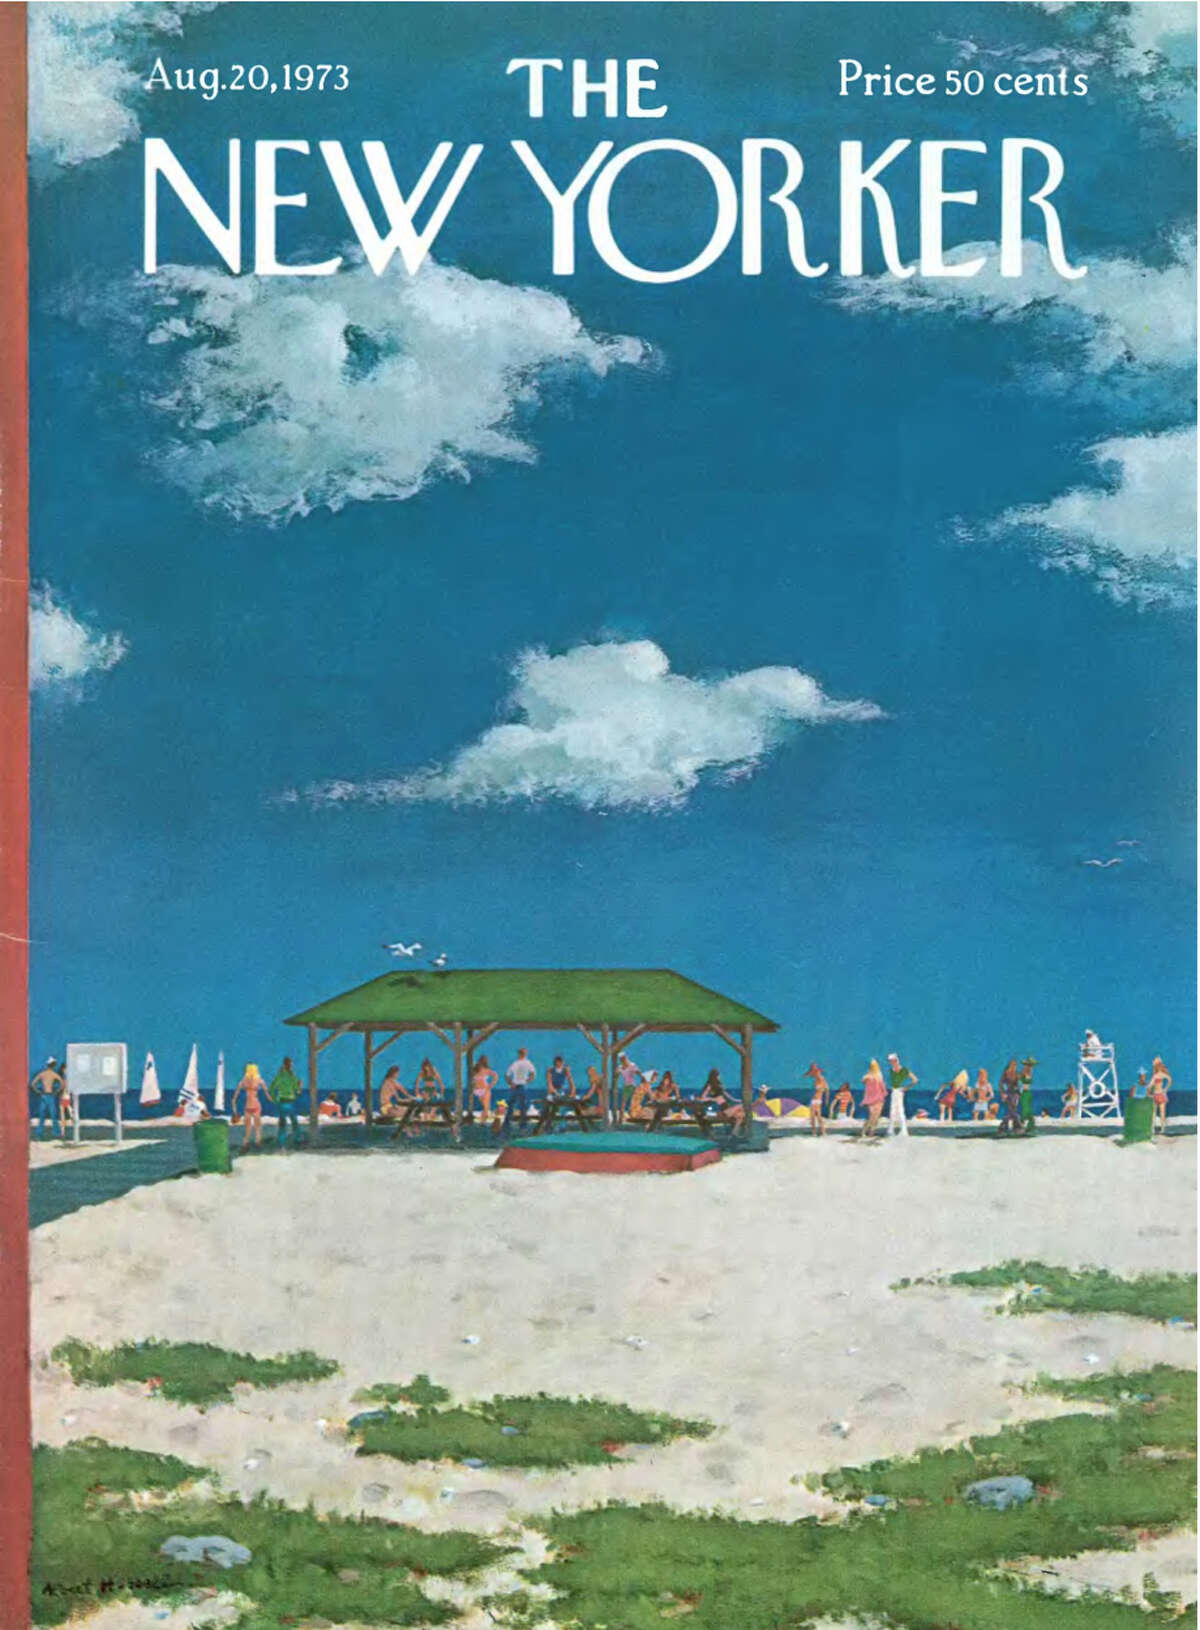 Albert Hubbell's cover of the New Yorker, August 1973, features Westport's Compo Beach. An exhibit of magazine covers at the Westport Historical Society has been extended through July 5.